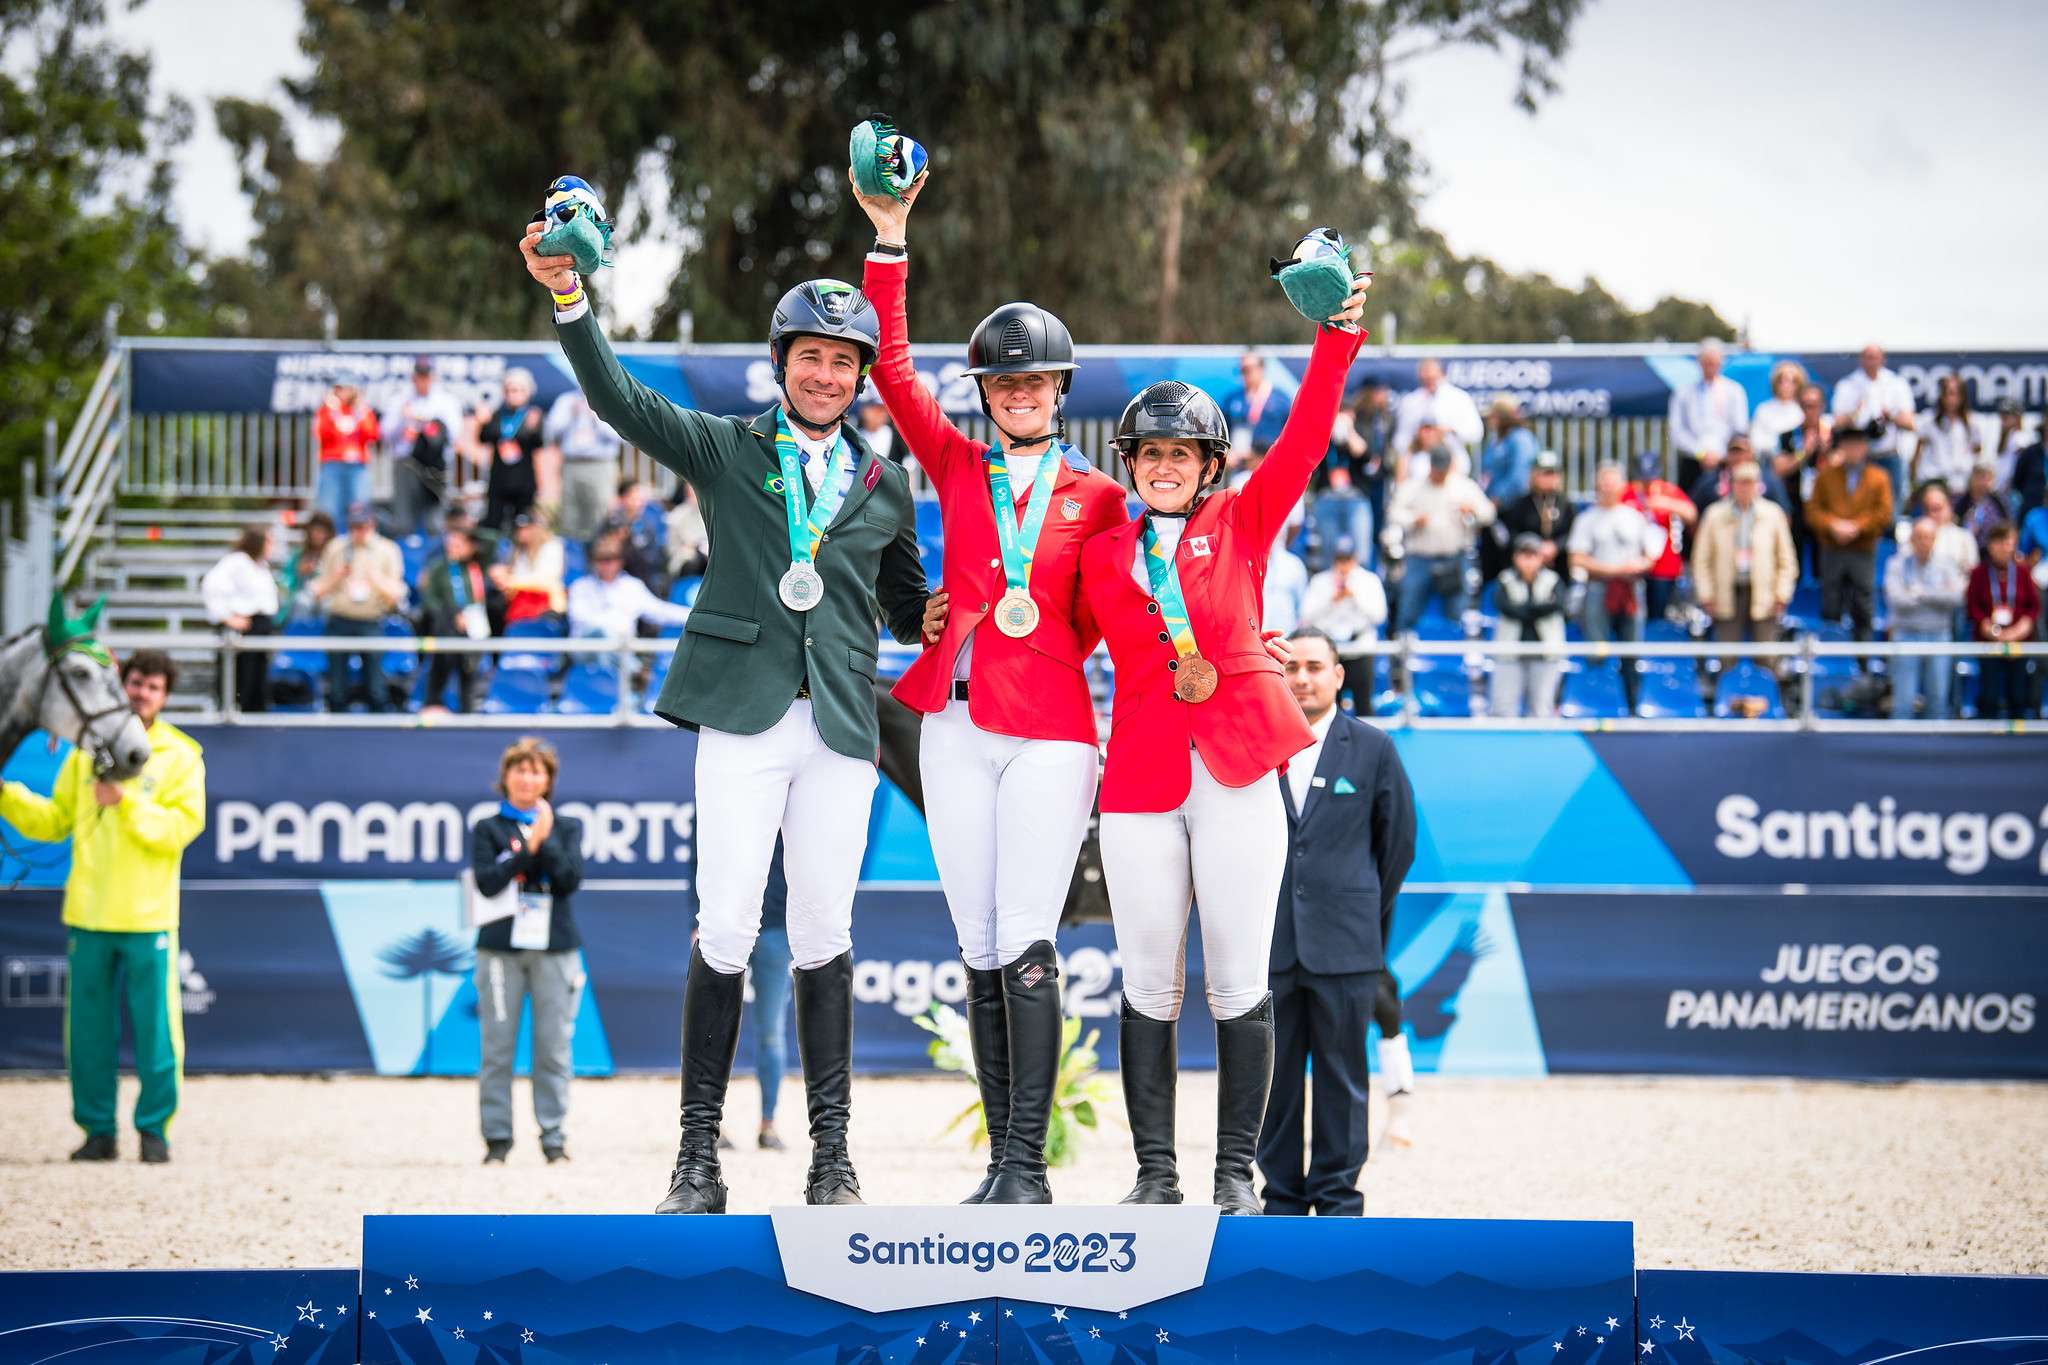 Marcio CARVALHO JORGE (BRA) bronze, Caroline PAMUKCU (USA) gold and Lindsay TRAISNEL (CAN) silver on the podium during show jumping in eventing at the Pan American Games Santiago, Chile 2023 Copyright ©FEI/Shannon Brinkman